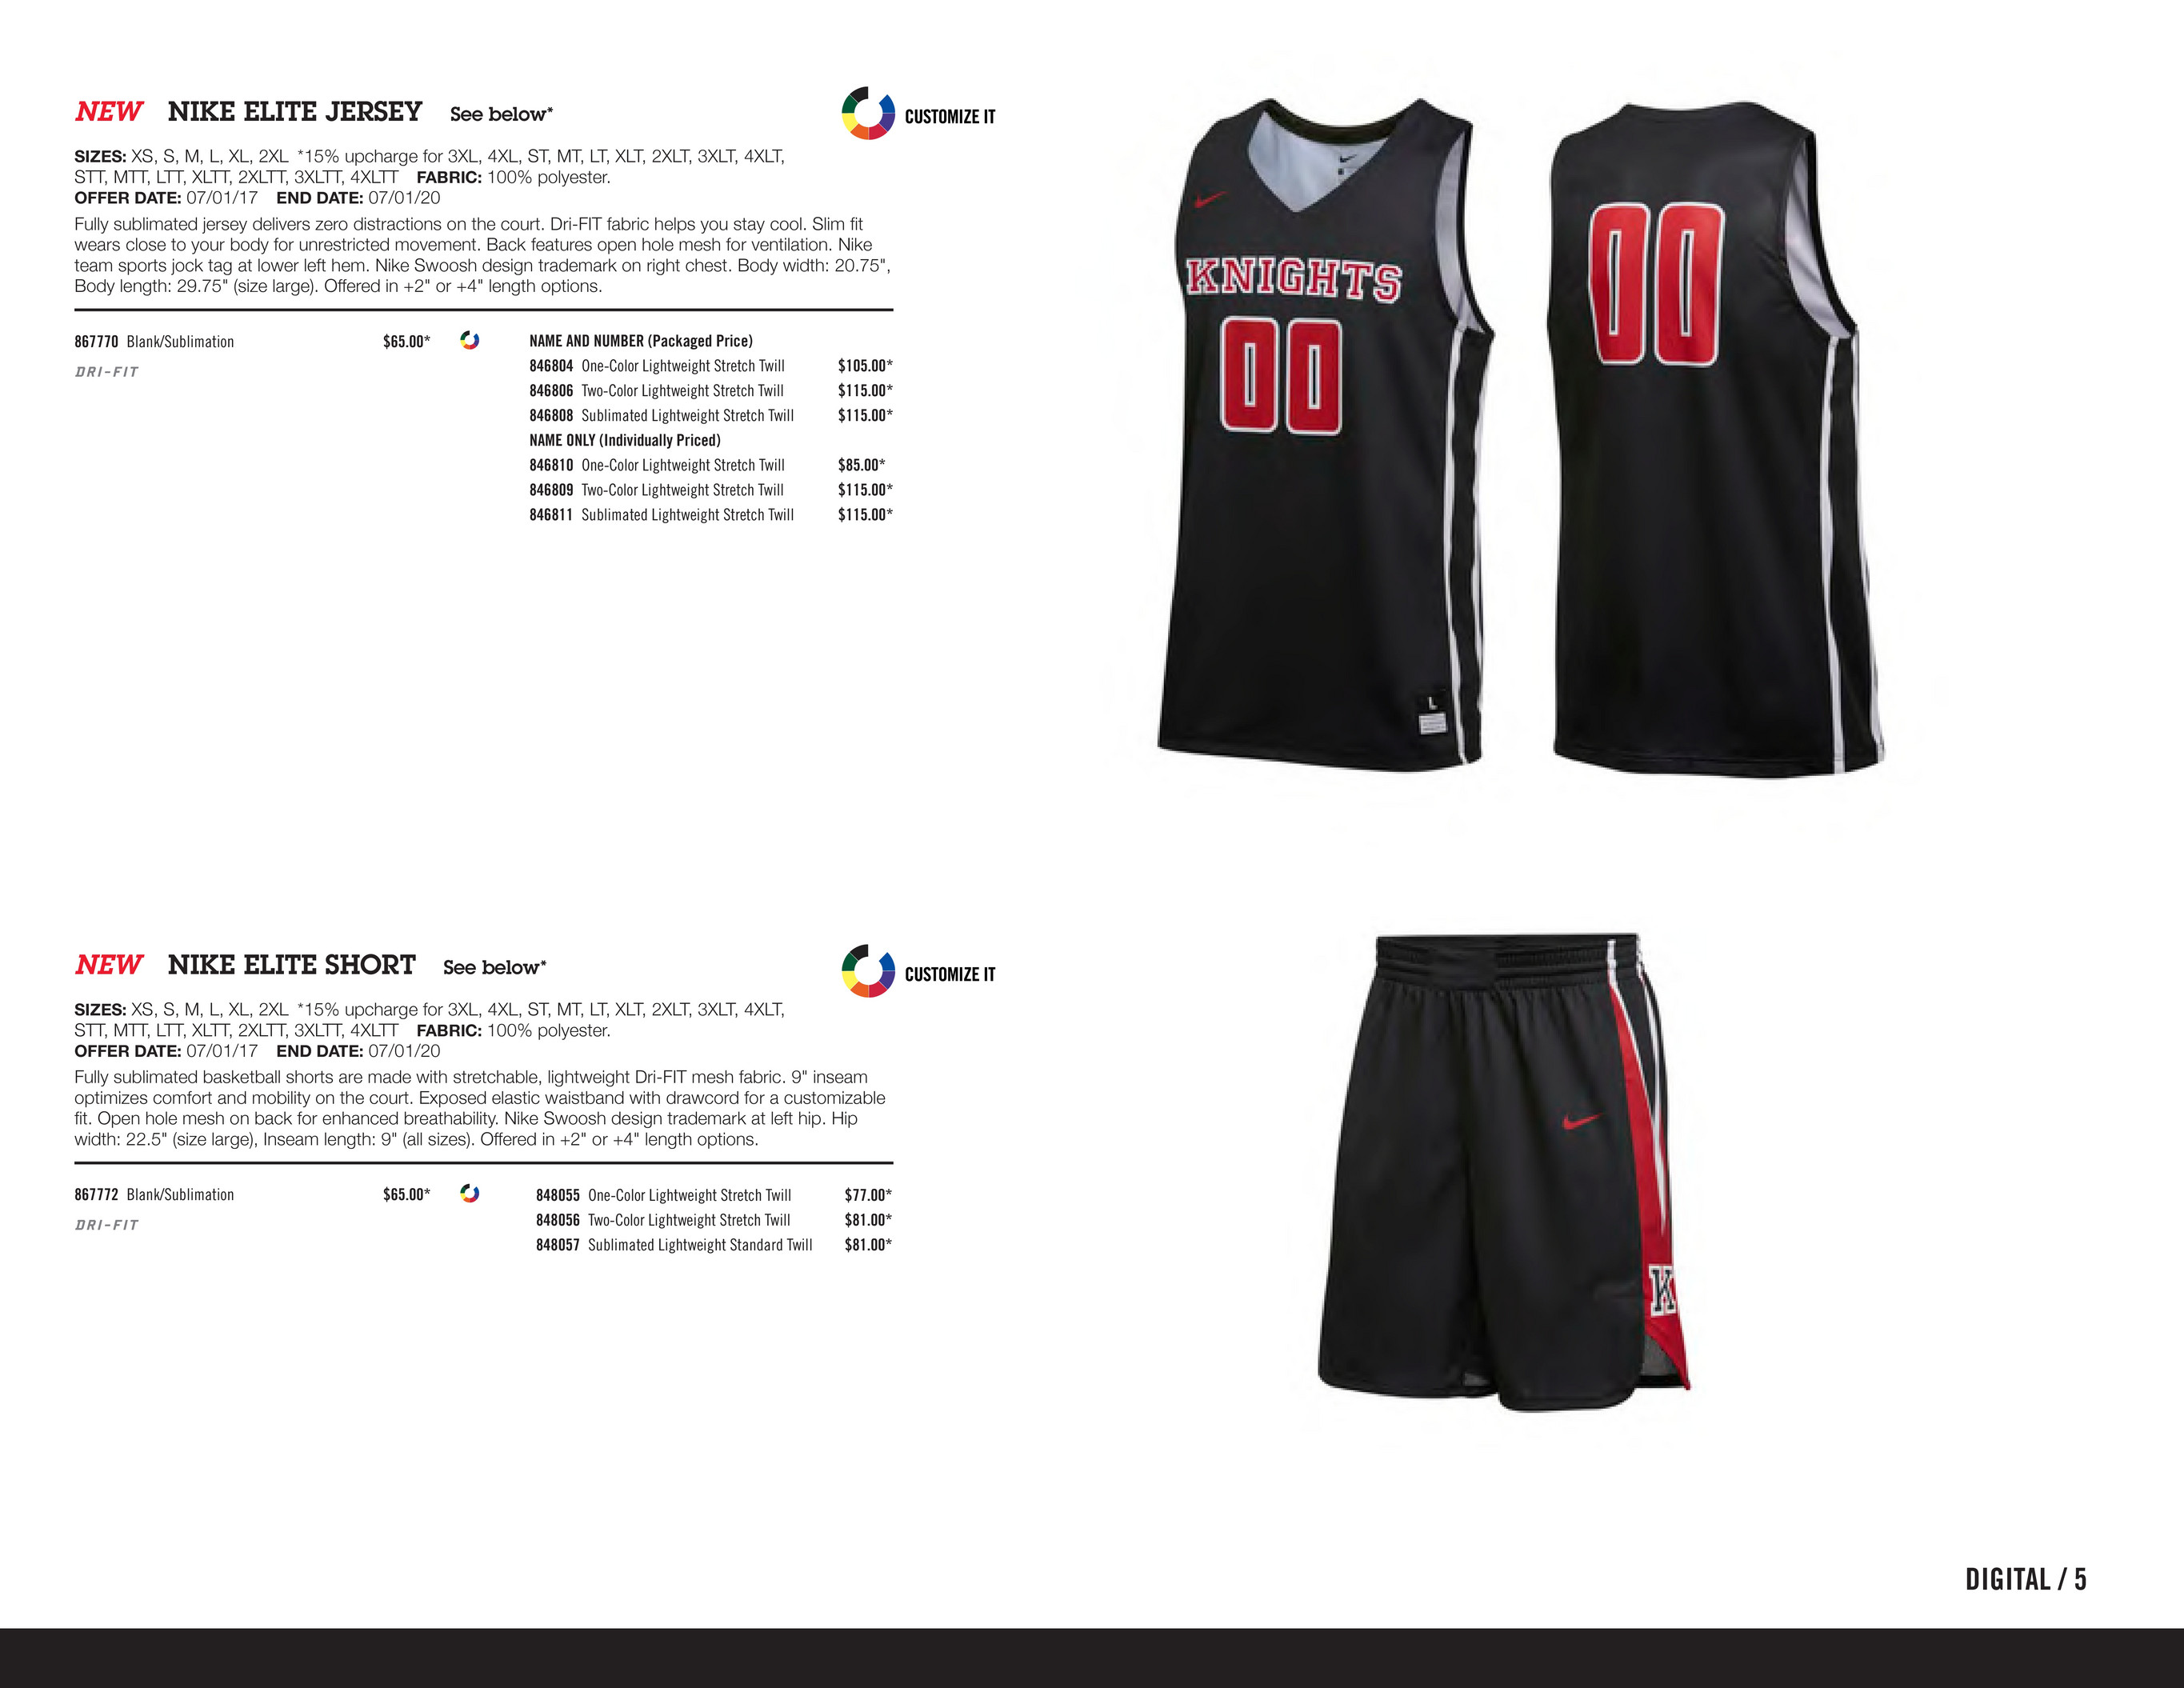 Johnny Mac's Sporting Goods - 2017 Nike Mens Basketball - Page 2 - Created  with Publitas.com